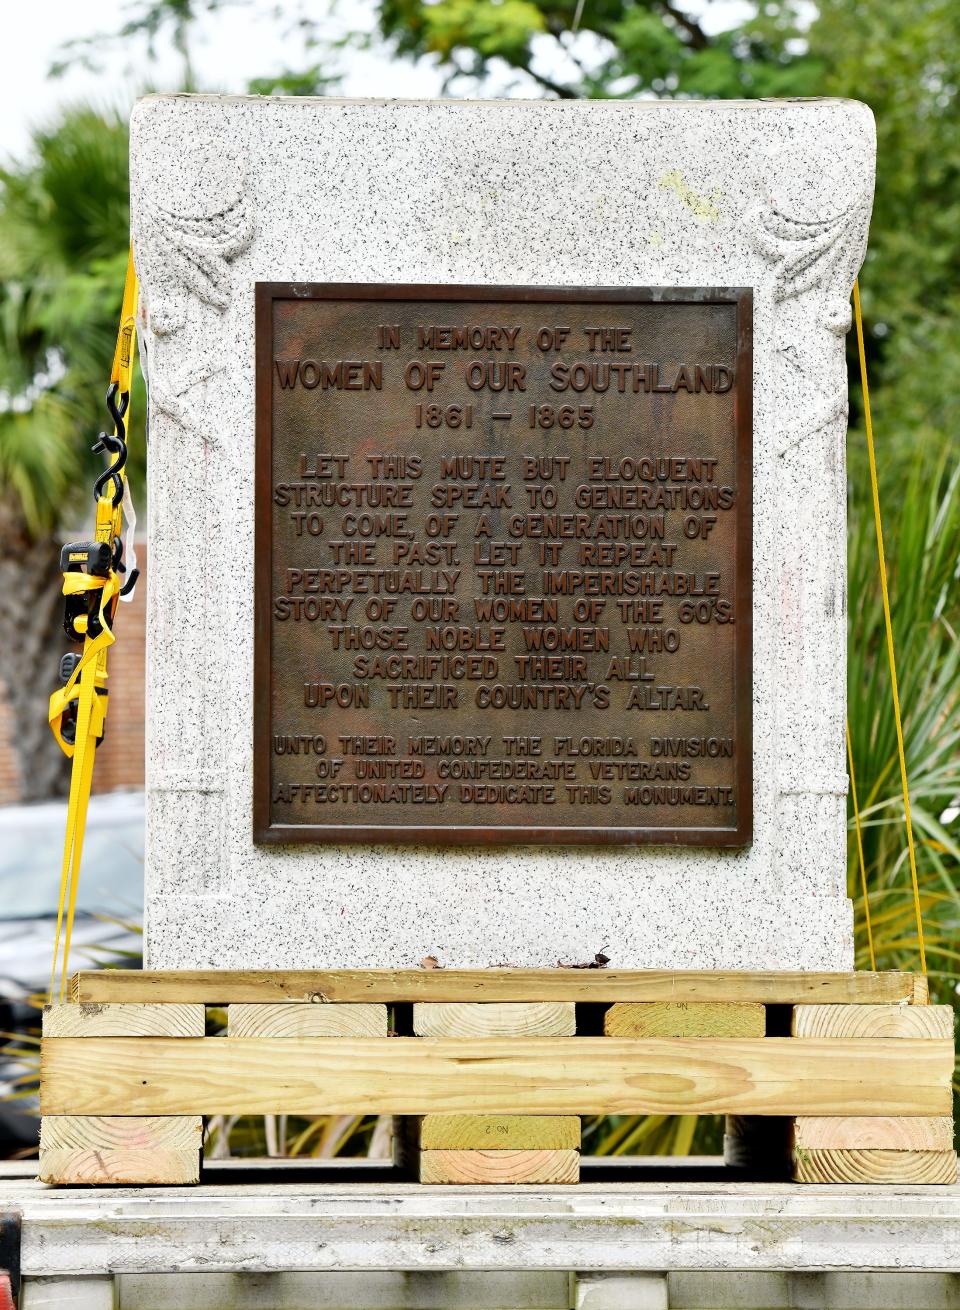 The pedestal and commemorative plaque that held up the bronze statue of a woman reading to two children is strapped to the bed of a flatbed truck after being removed from the "Women of the Southland" monument Dec. 27 at Springfield Park in Jacksonville.